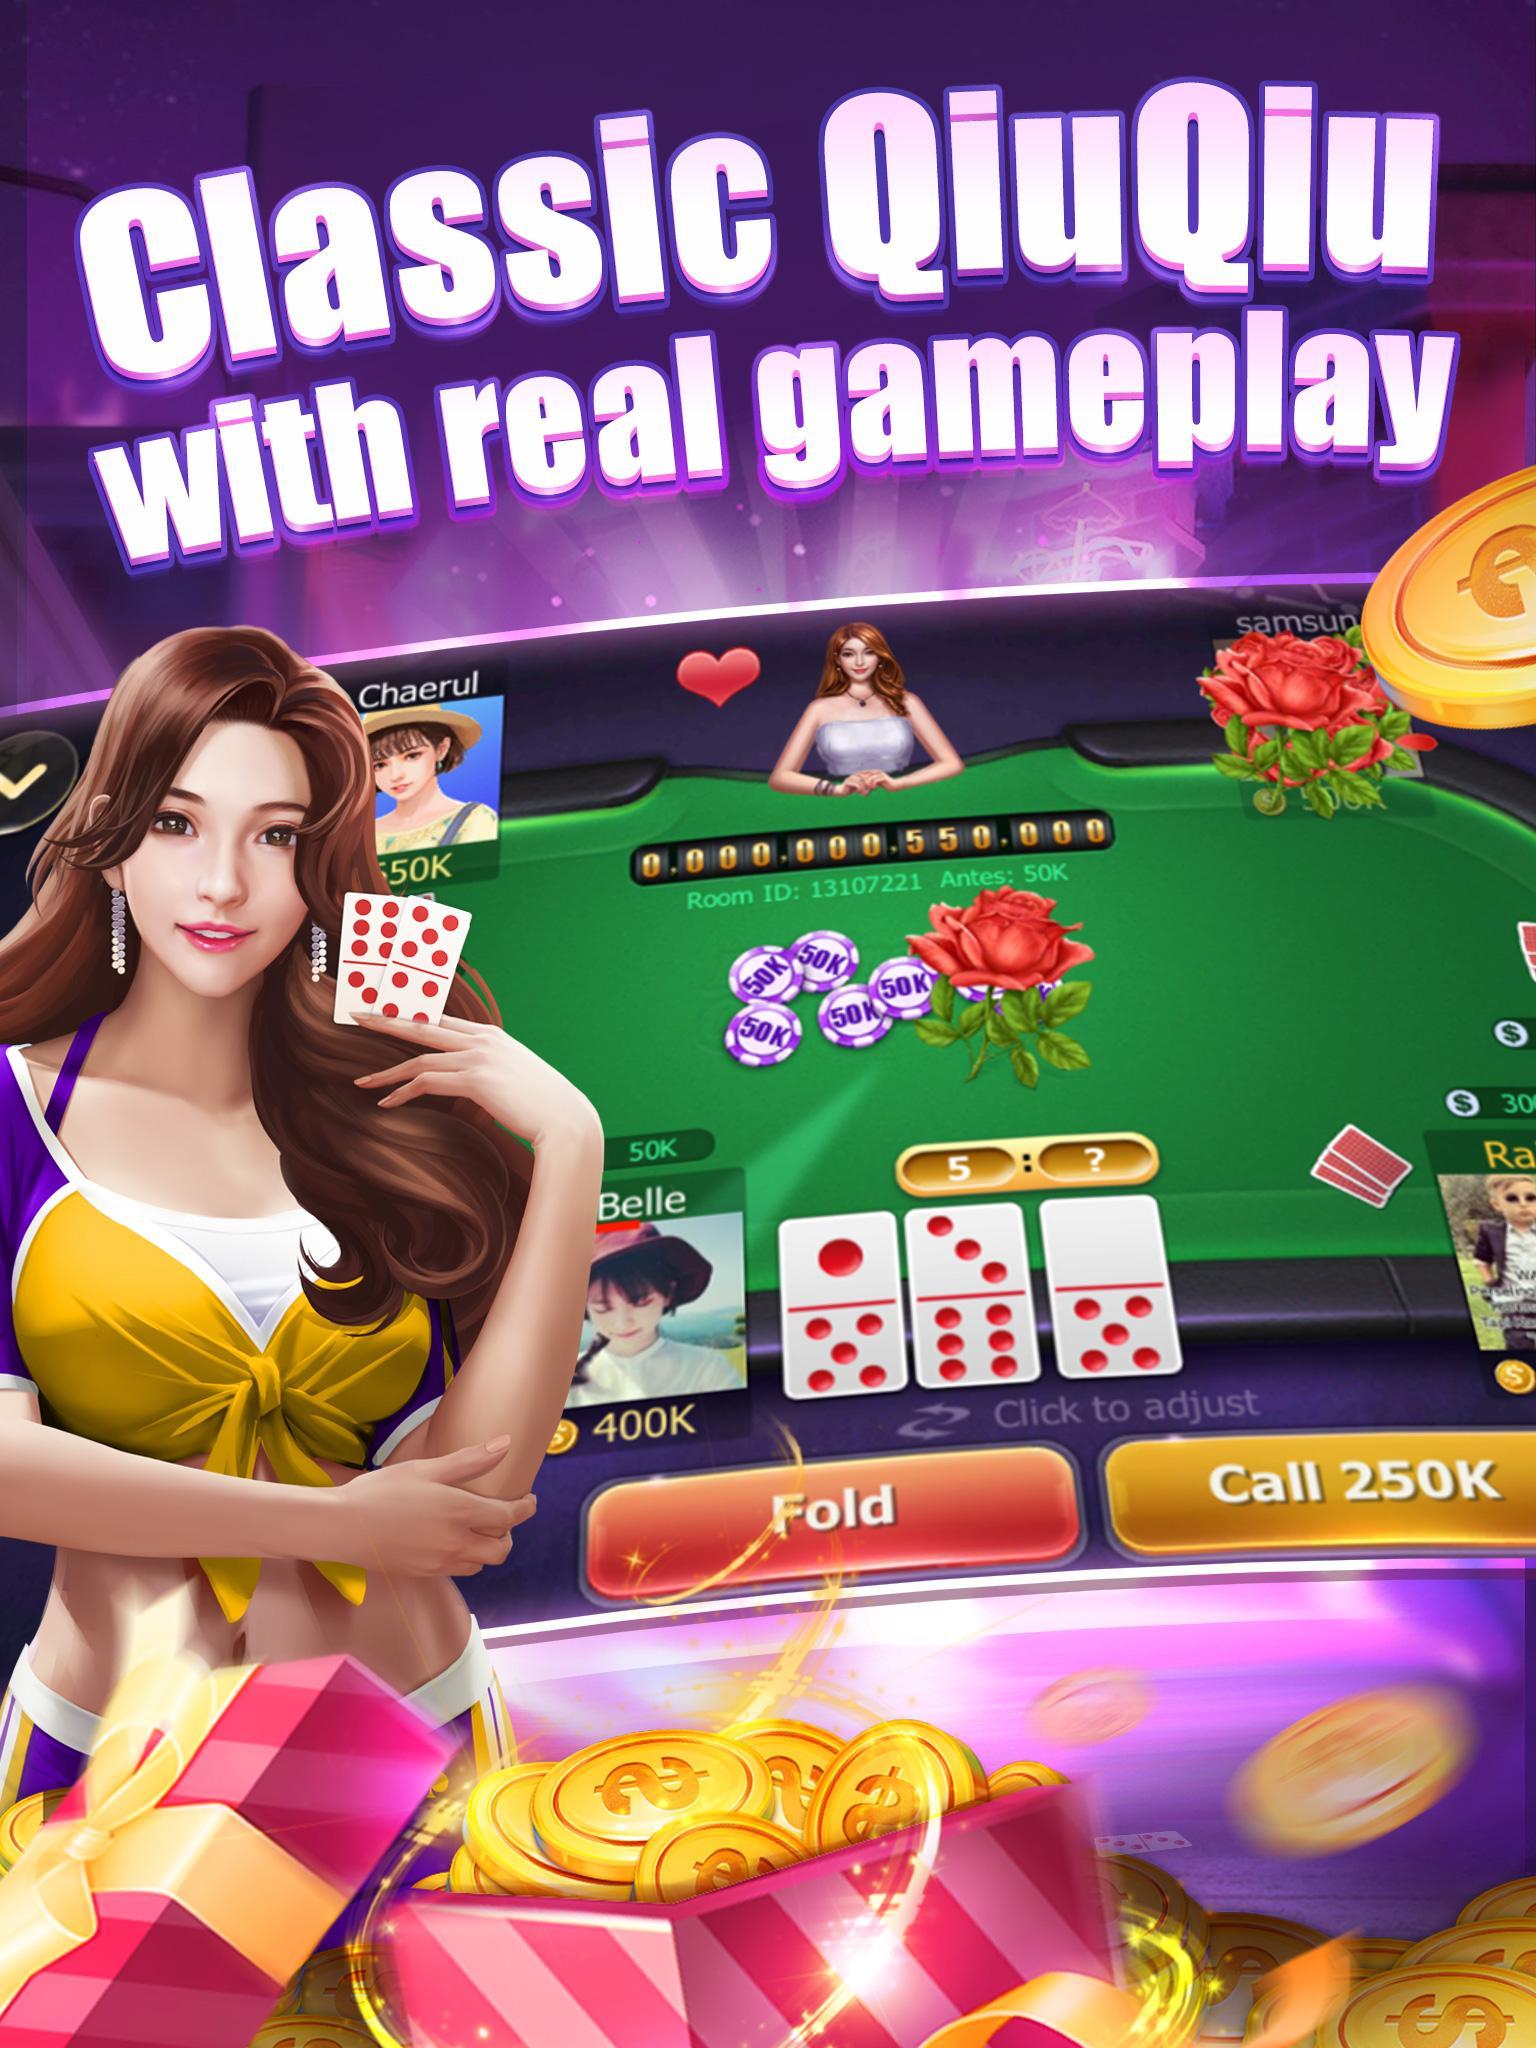 Read more about the article Download Game Domino Qiu Qiu Online Untuk Android, Gaple Capsa Susun: QiuQiu(99)/Texas Remi Online<div class='yasr-stars-title yasr-rater-stars'
                          id='yasr-visitor-votes-readonly-rater-b0d2f45632e24'
                          data-rating='0'
                          data-rater-starsize='16'
                          data-rater-postid='2298'
                          data-rater-readonly='true'
                          data-readonly-attribute='true'
                      ></div><span class='yasr-stars-title-average'>0 (0)</span>